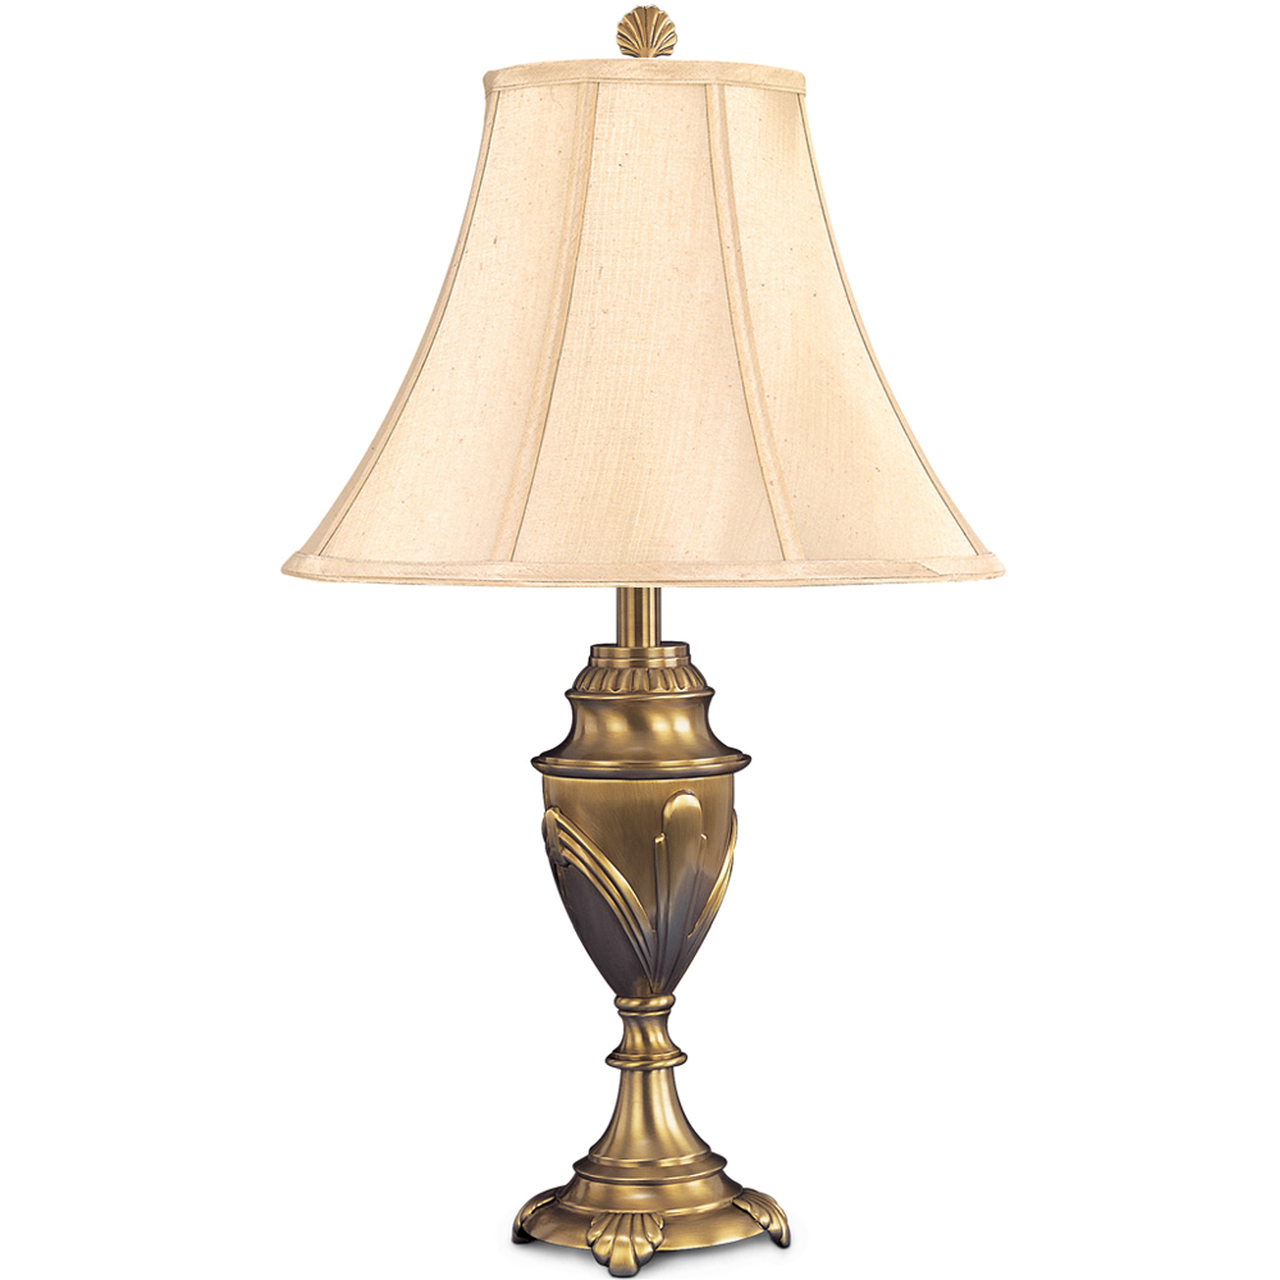 Lite Master Traditional Table Lamp